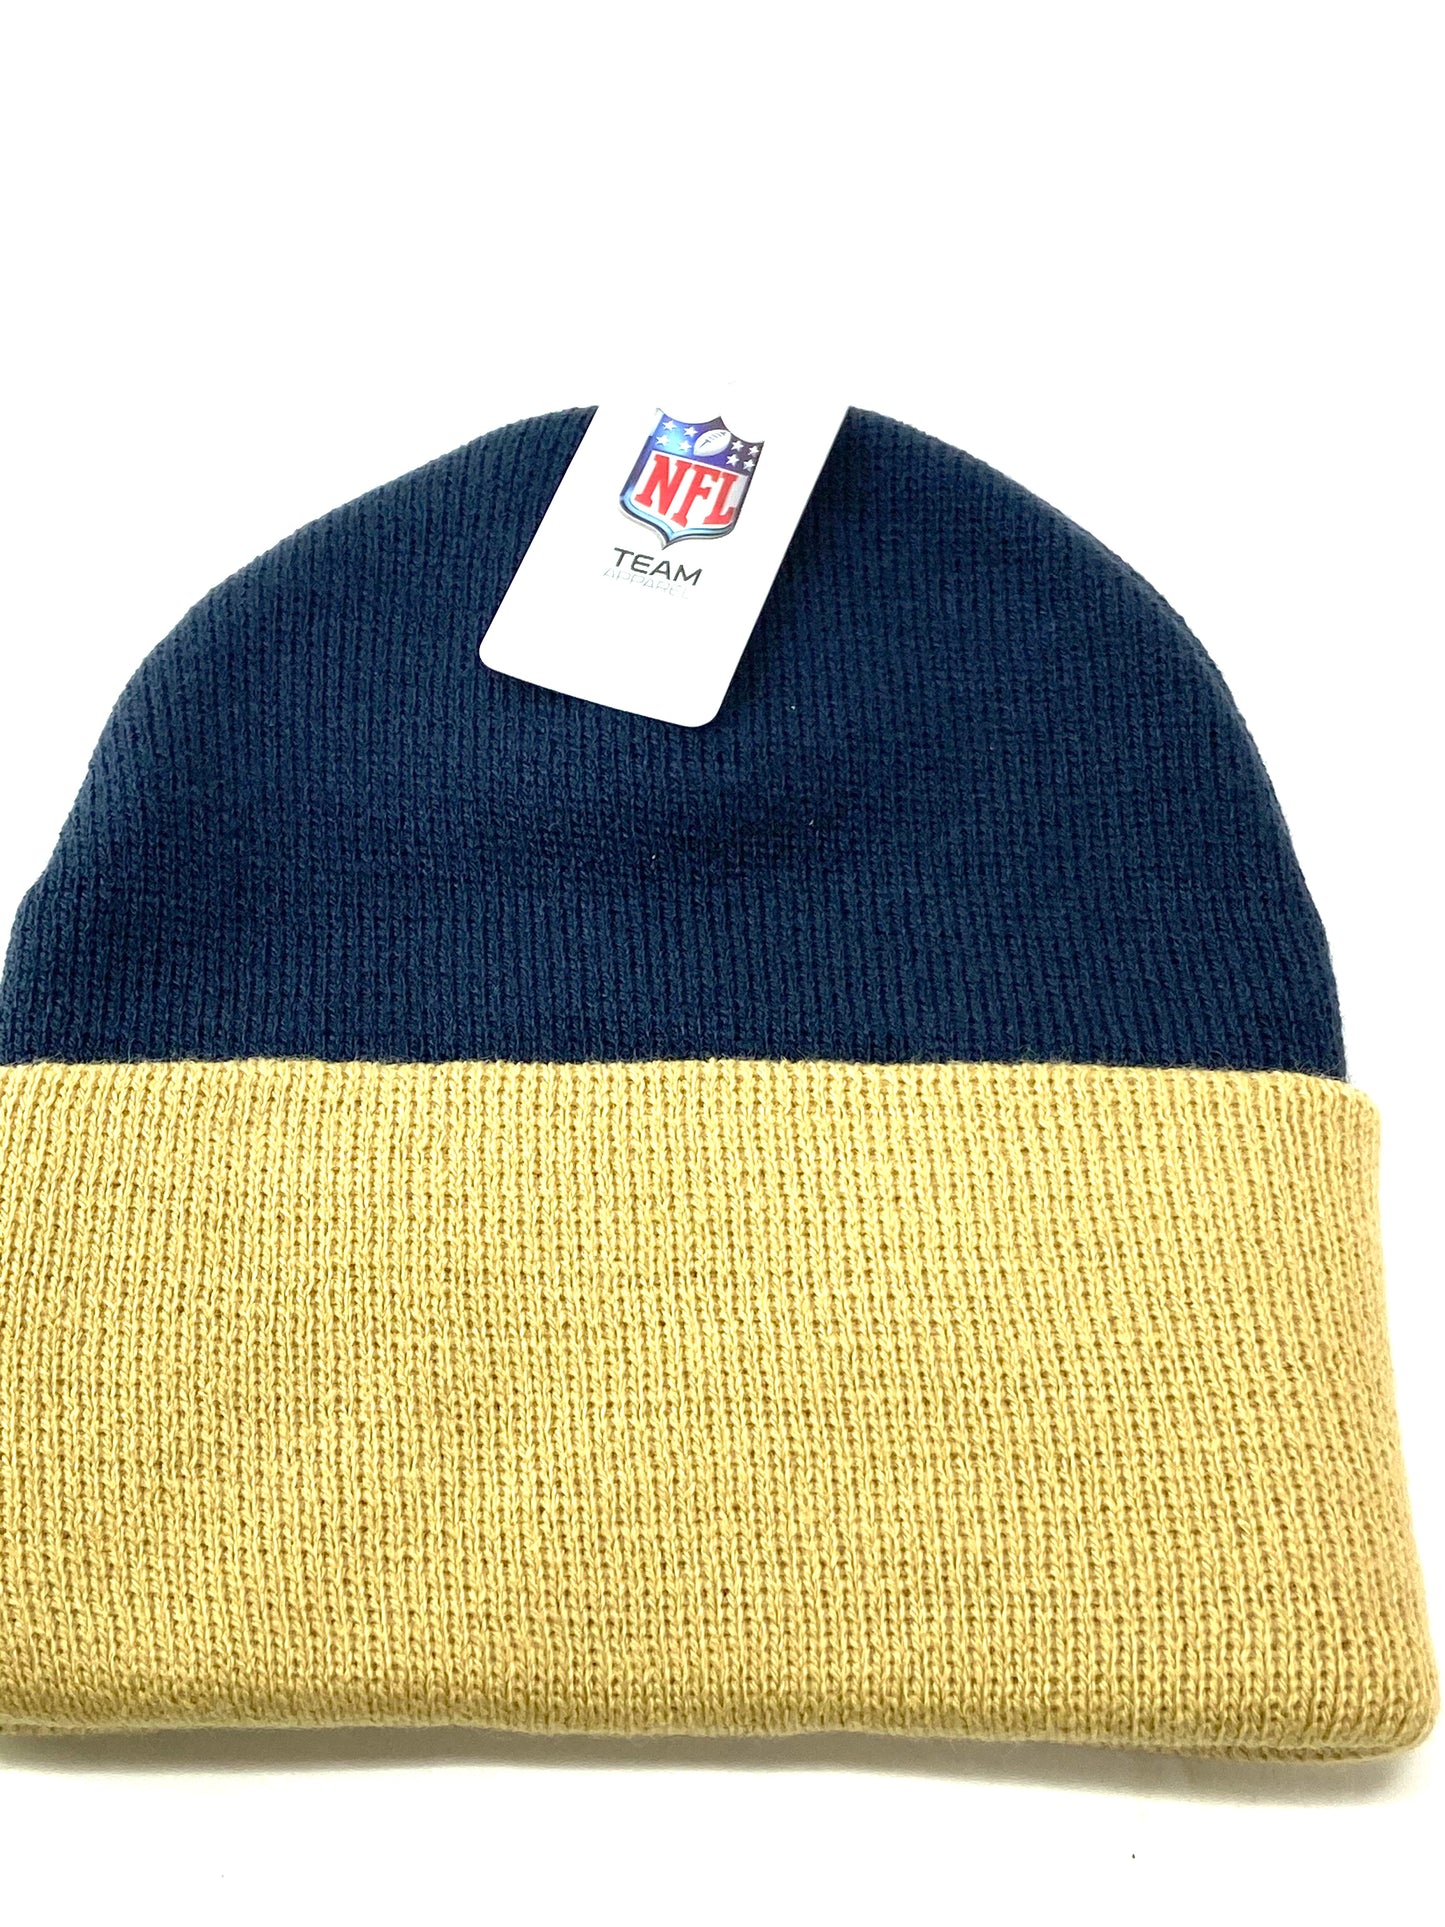 St. Louis Rams NFL Acrylic Knit Hat by NFL Team Apparel